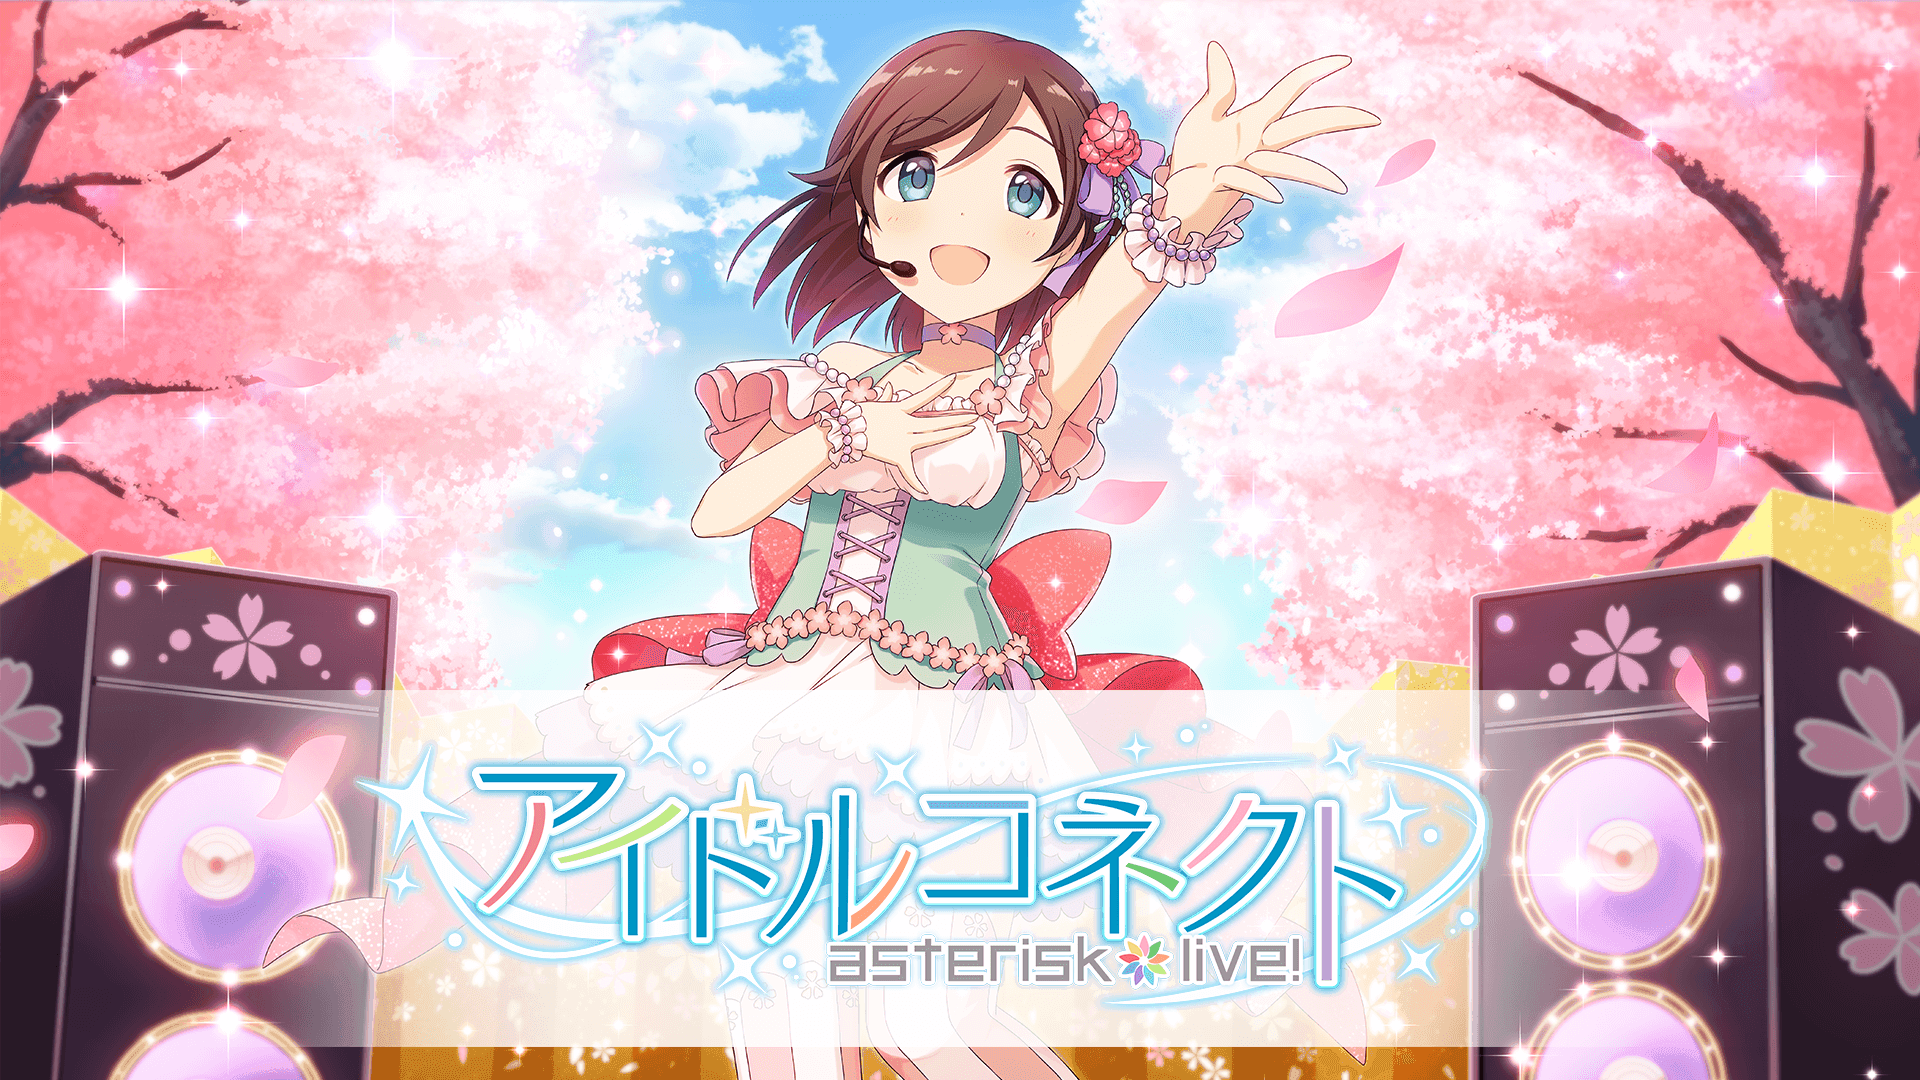 Screenshot 1 of Idol Connect -Asterisk Live- 1.0.12